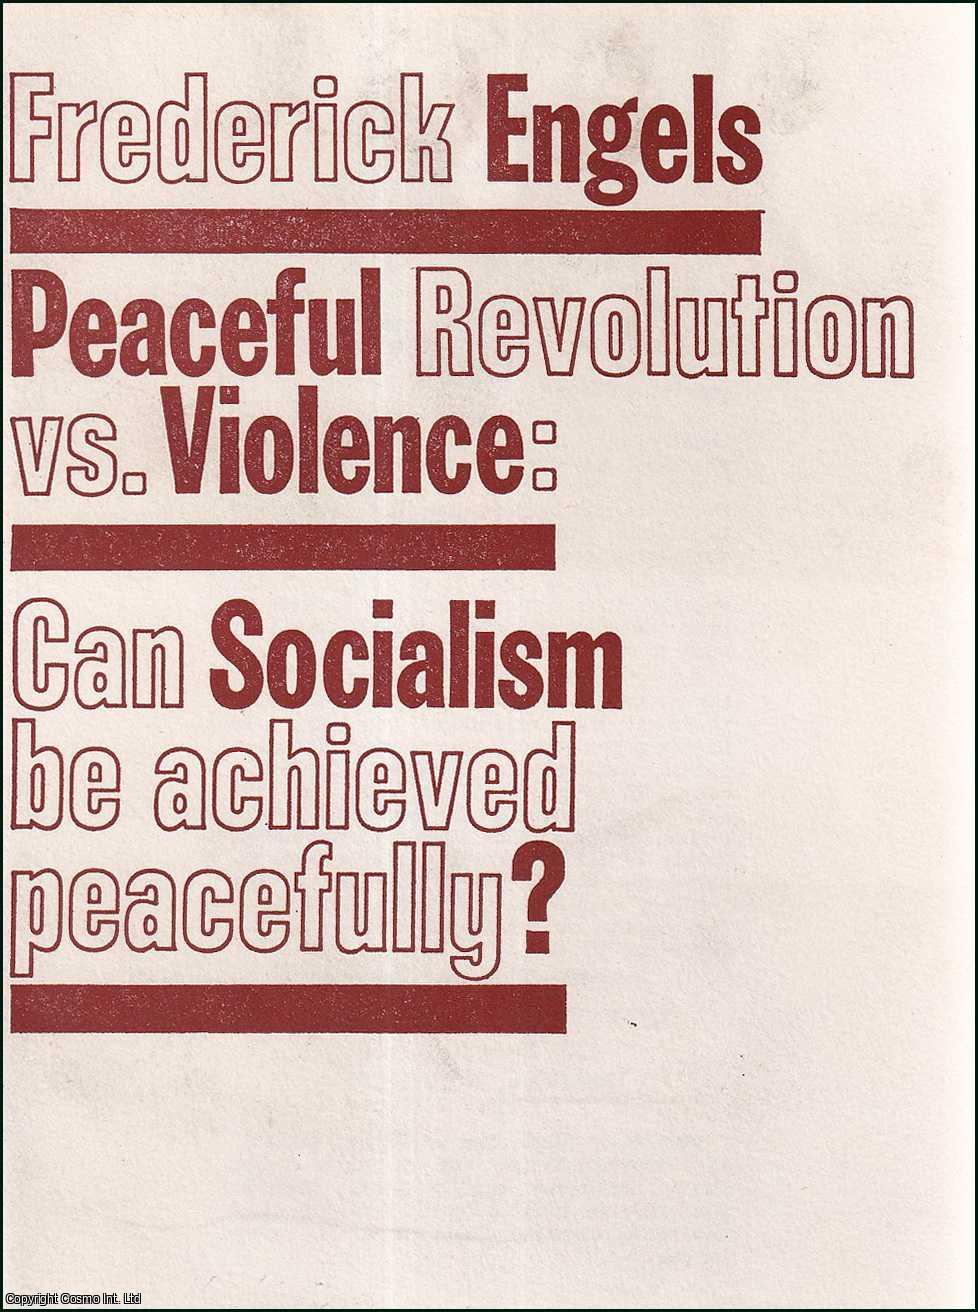 Frederick Engels - Peaceful Revolution vs. Violence: Can Socialism be Achieved Peacefully?